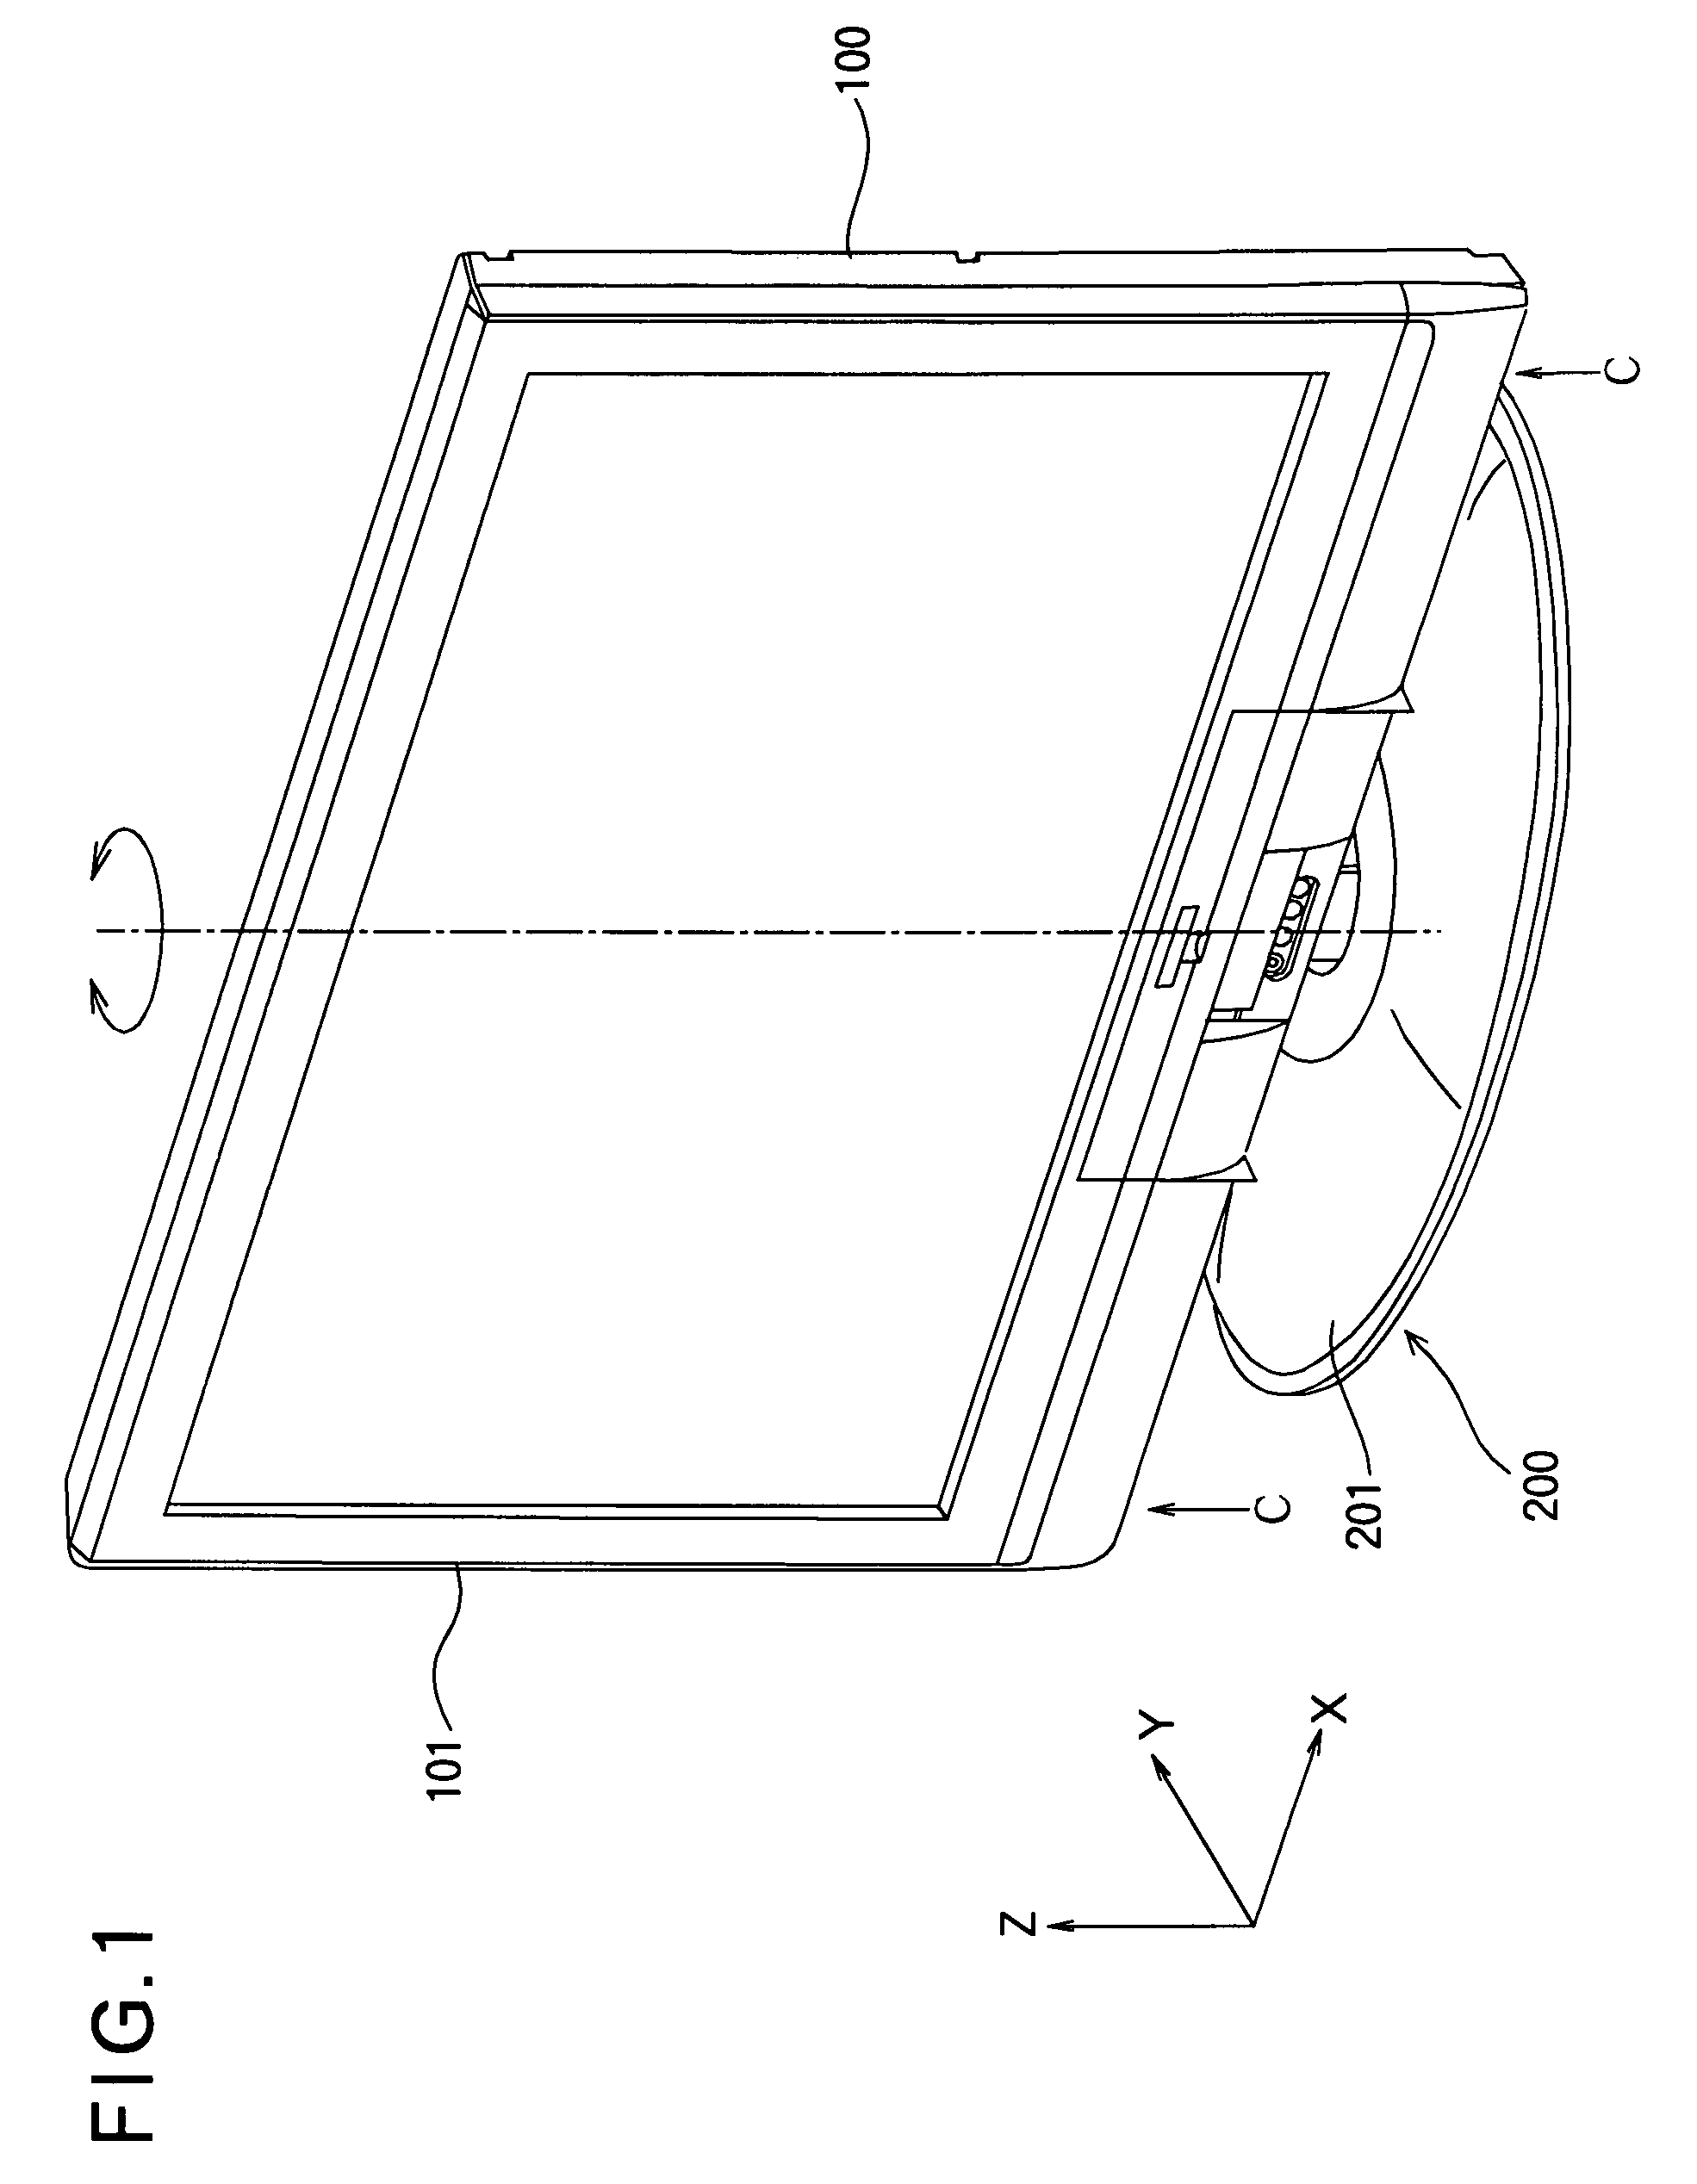 Turntable and display apparatus